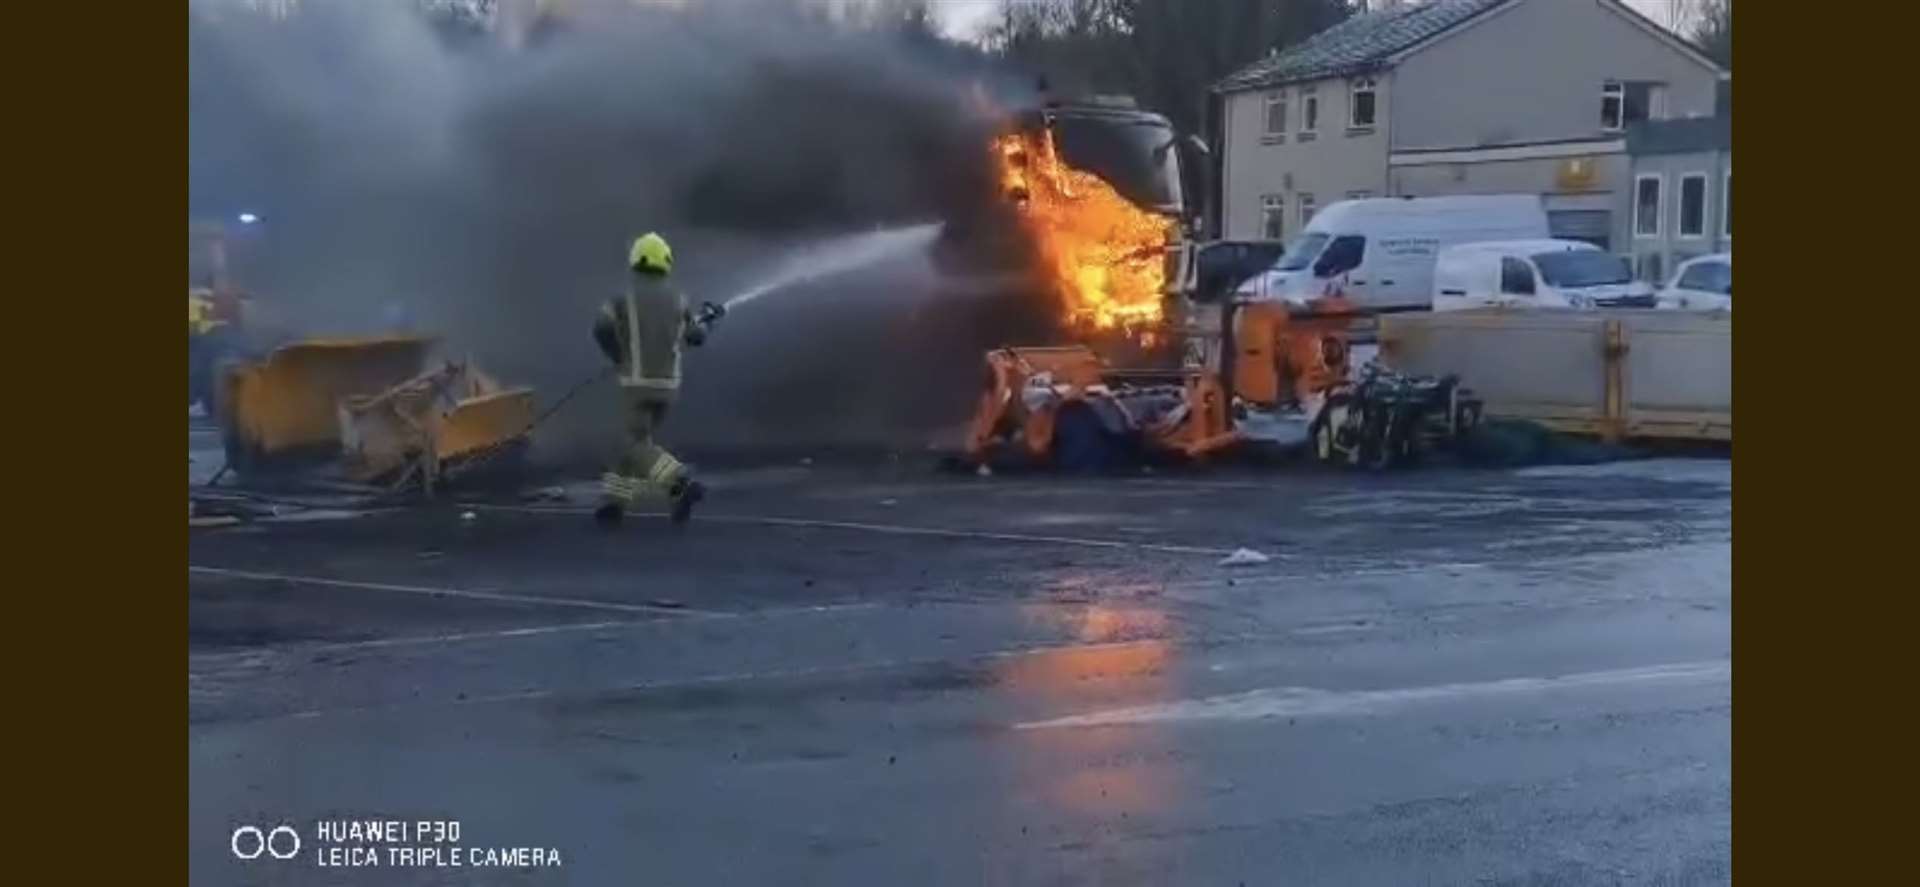 Still from the gritter fire video in Inverness.